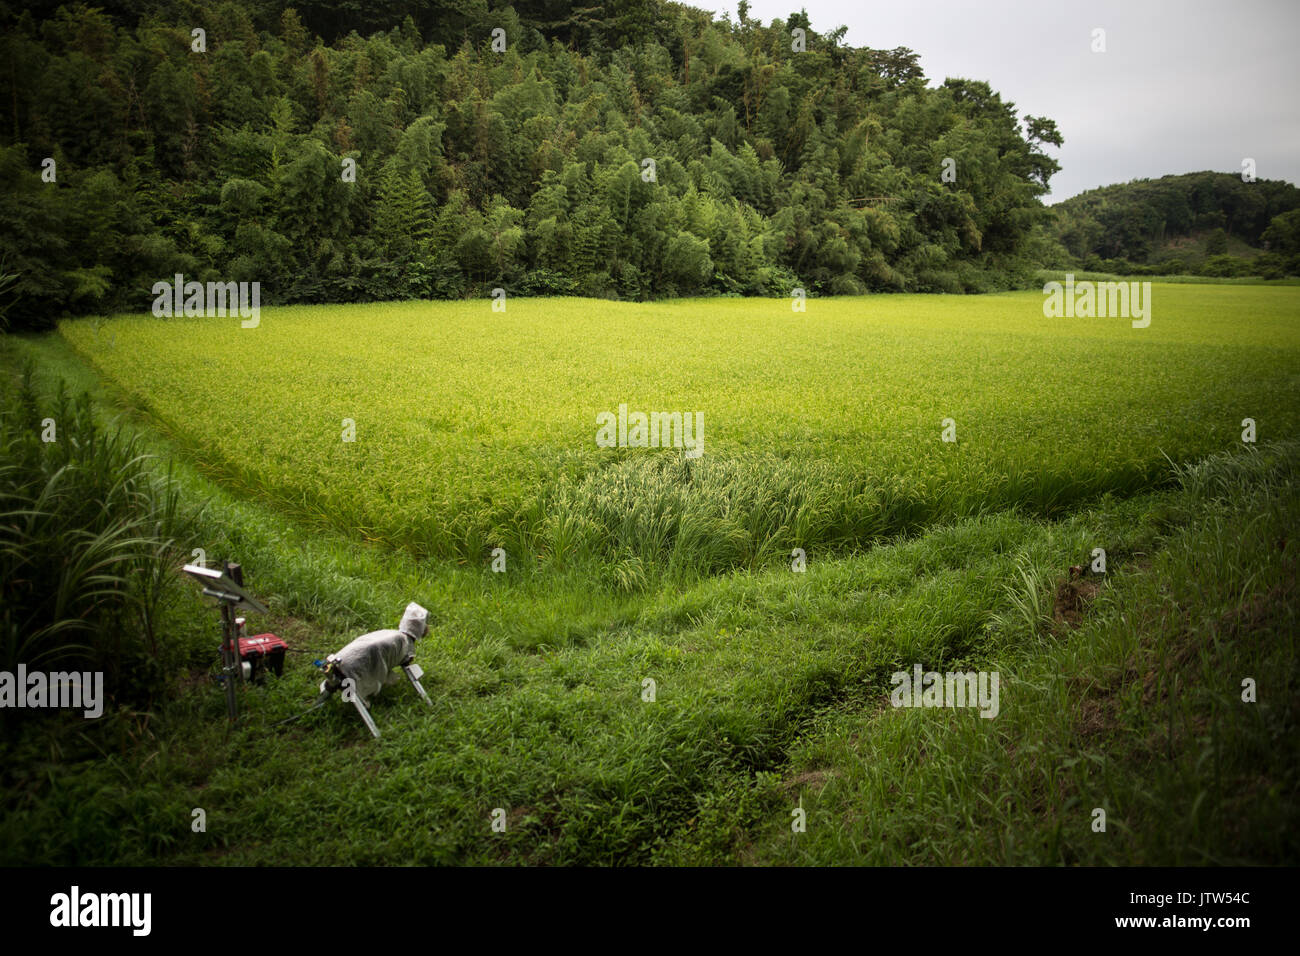 CHIBA, JAPAN - AUGUST 10: A robot named 'Super Monster Wolf' a solar powered robot designed to scare away wild animals from farmer crops is seen in the rice field in Kisarazu, southwestern Chiba Prefecture, Japan on August 10, 2017. Credit: Richard Atrero de Guzman/AFLO/Alamy Live News Stock Photo